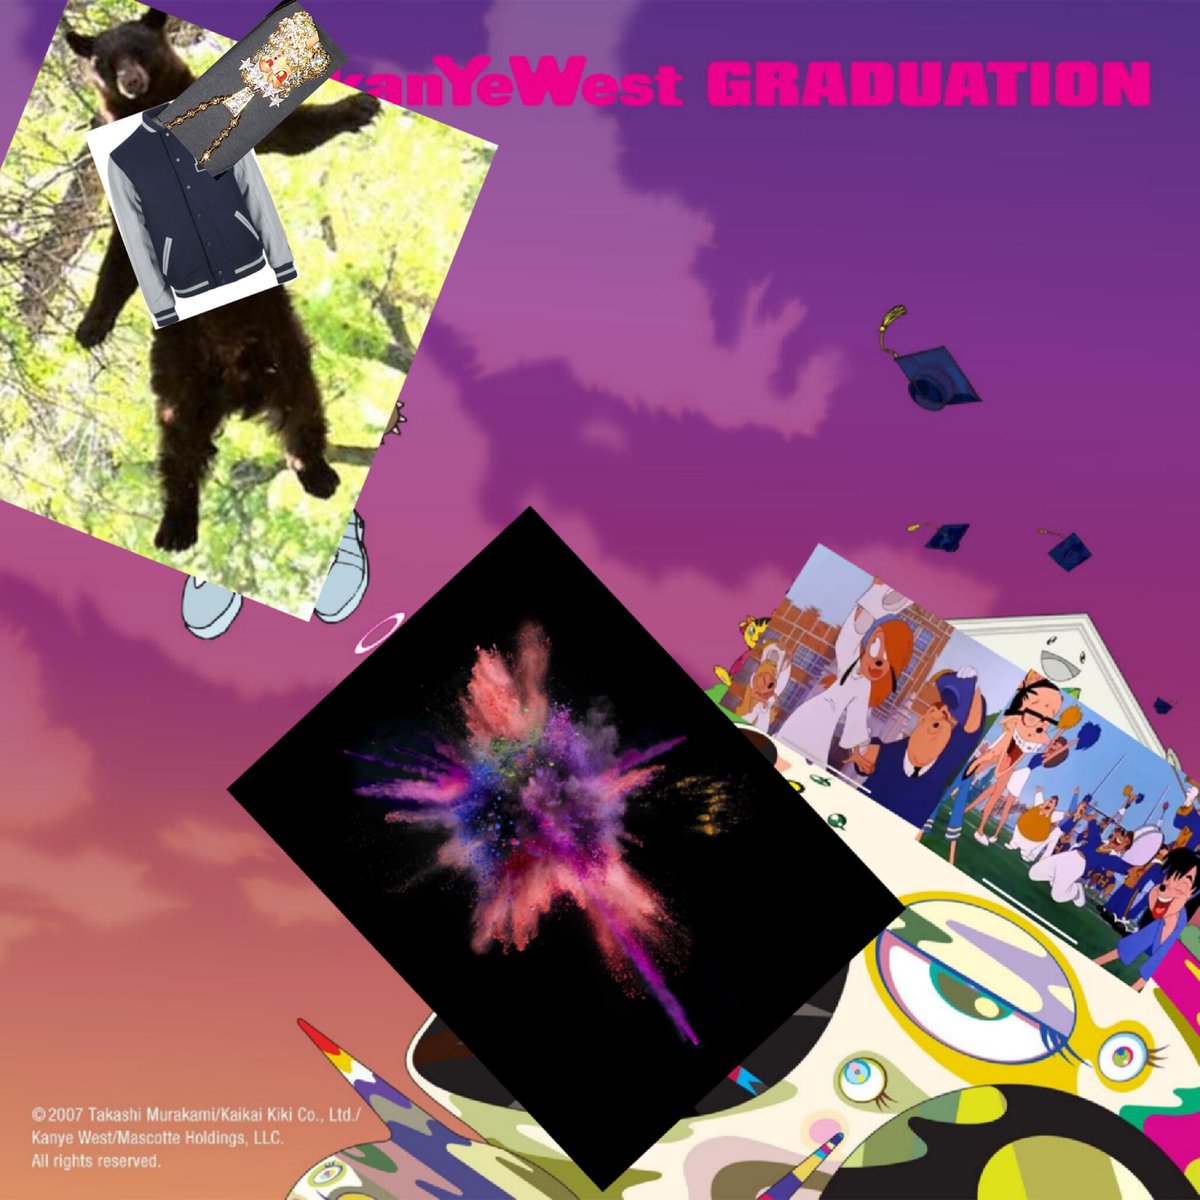 Film Colossus on X: The Virgil Abloh edition of the Graduation album cover  #Kanye  / X